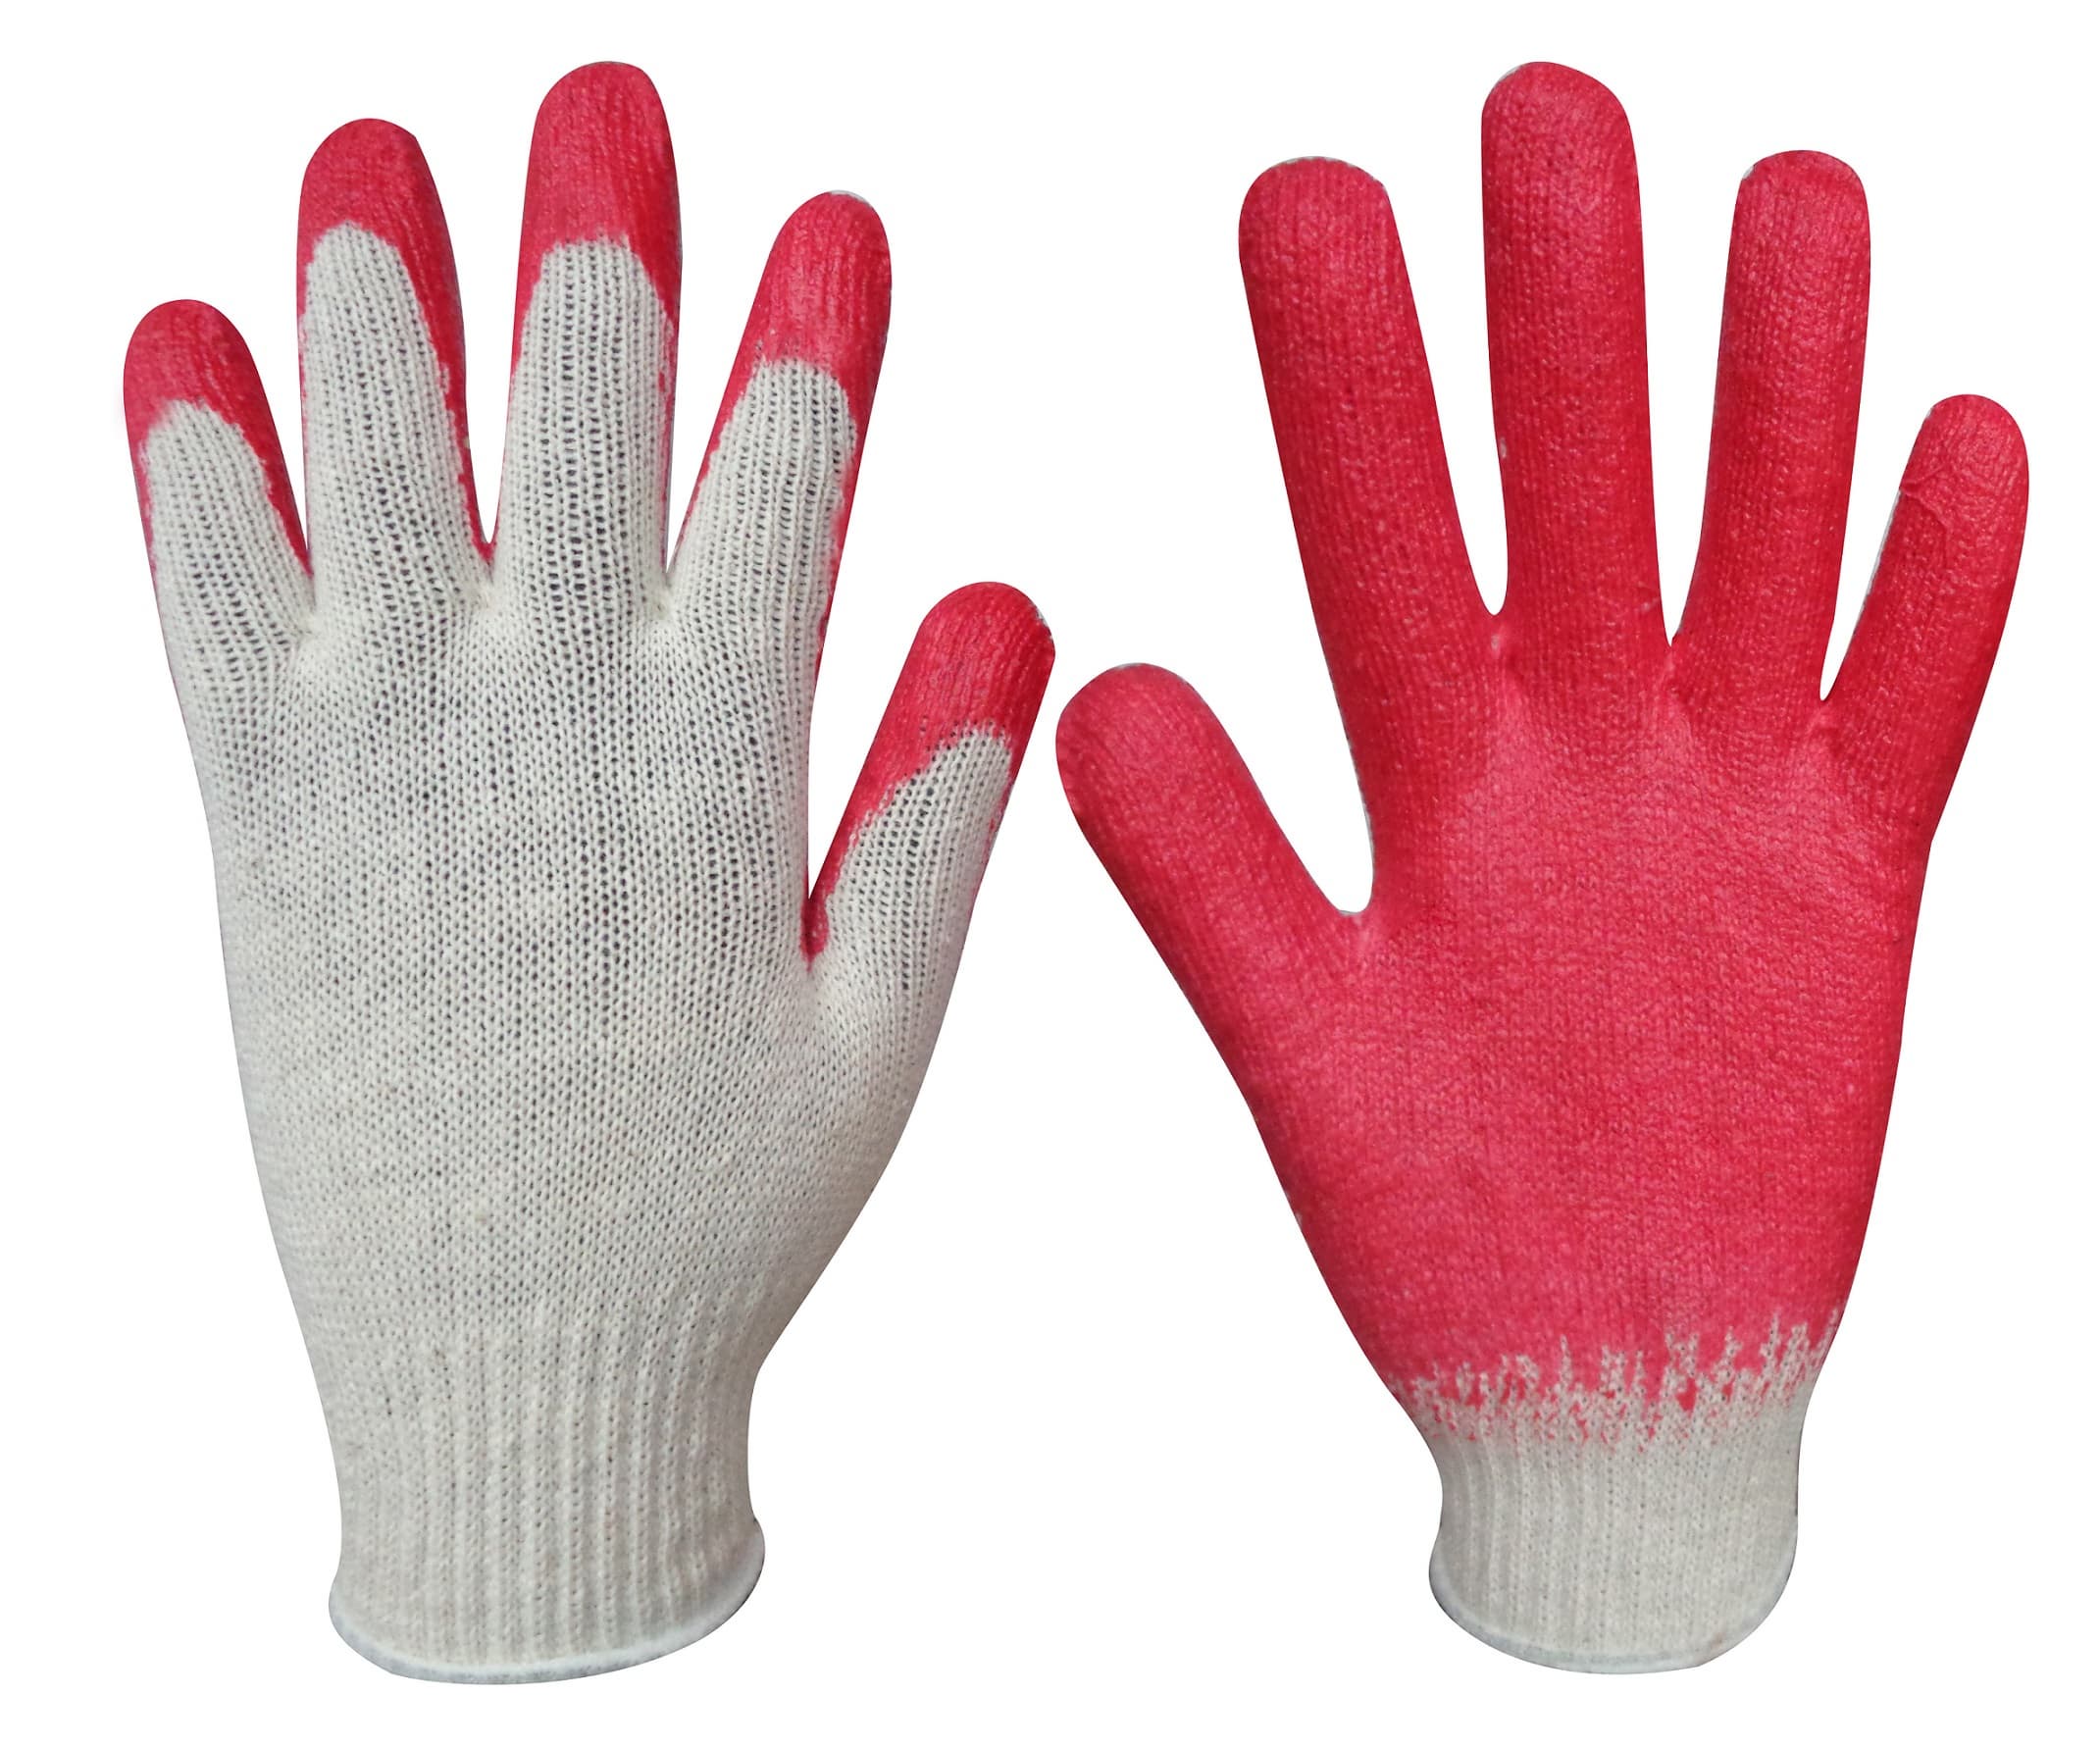 LCG10_10G T_C_70_30_ with natural Latex coating gloves